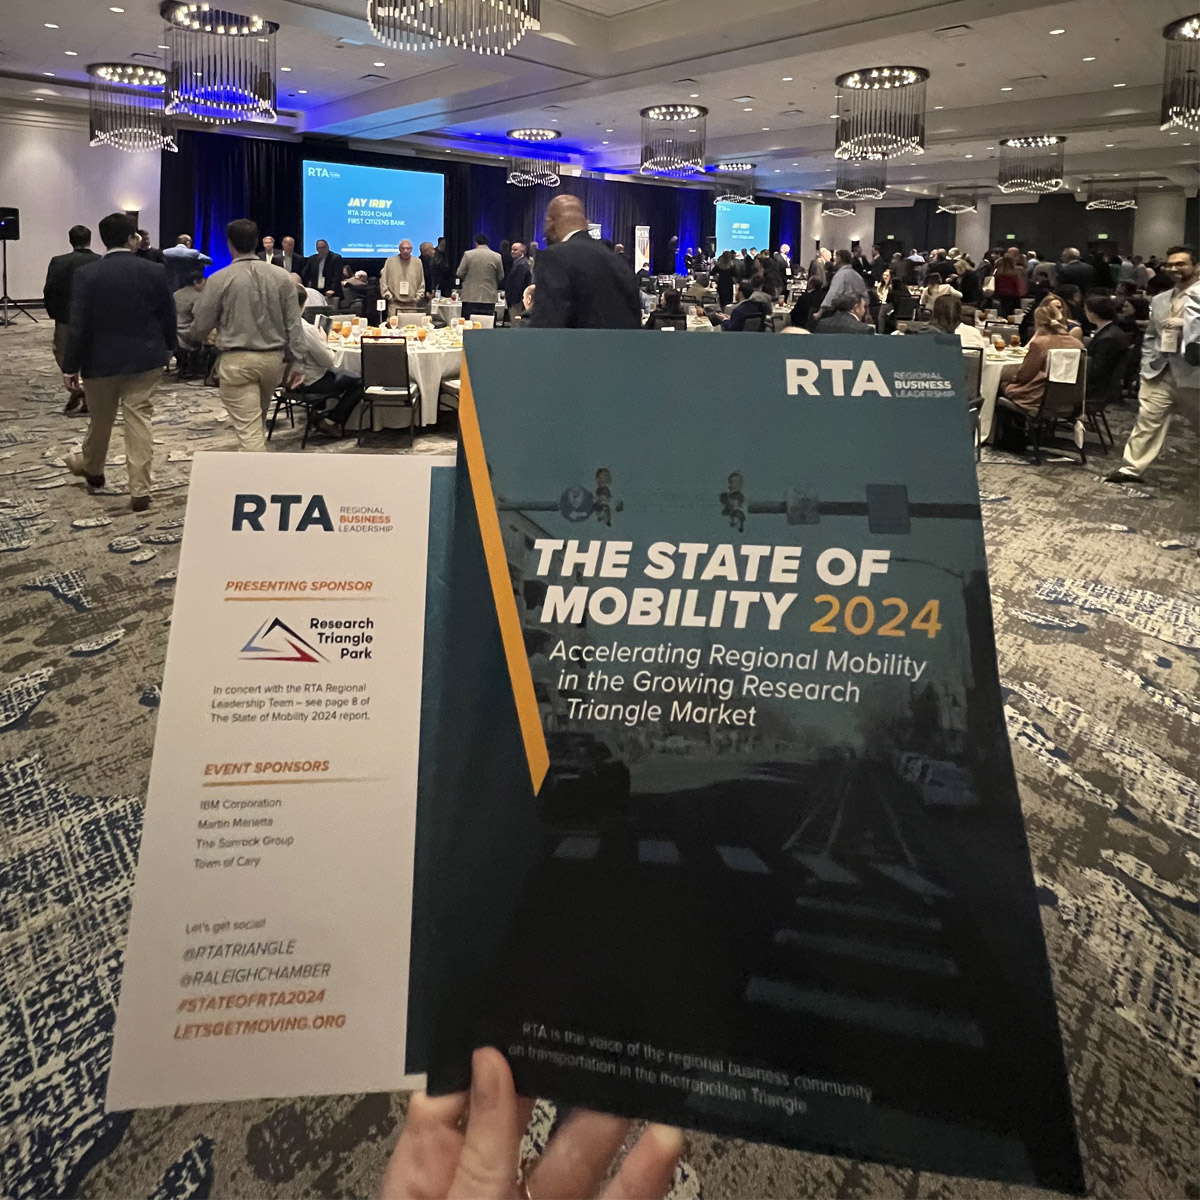 We joined the discussion at the 'State of Mobility 2024' conference. 

What we learned: bit.ly/48TXu5E

We are not claiming to have come up with these numbers or facts or are leading these initiatives – we are simply reporting on what we heard at the conference.